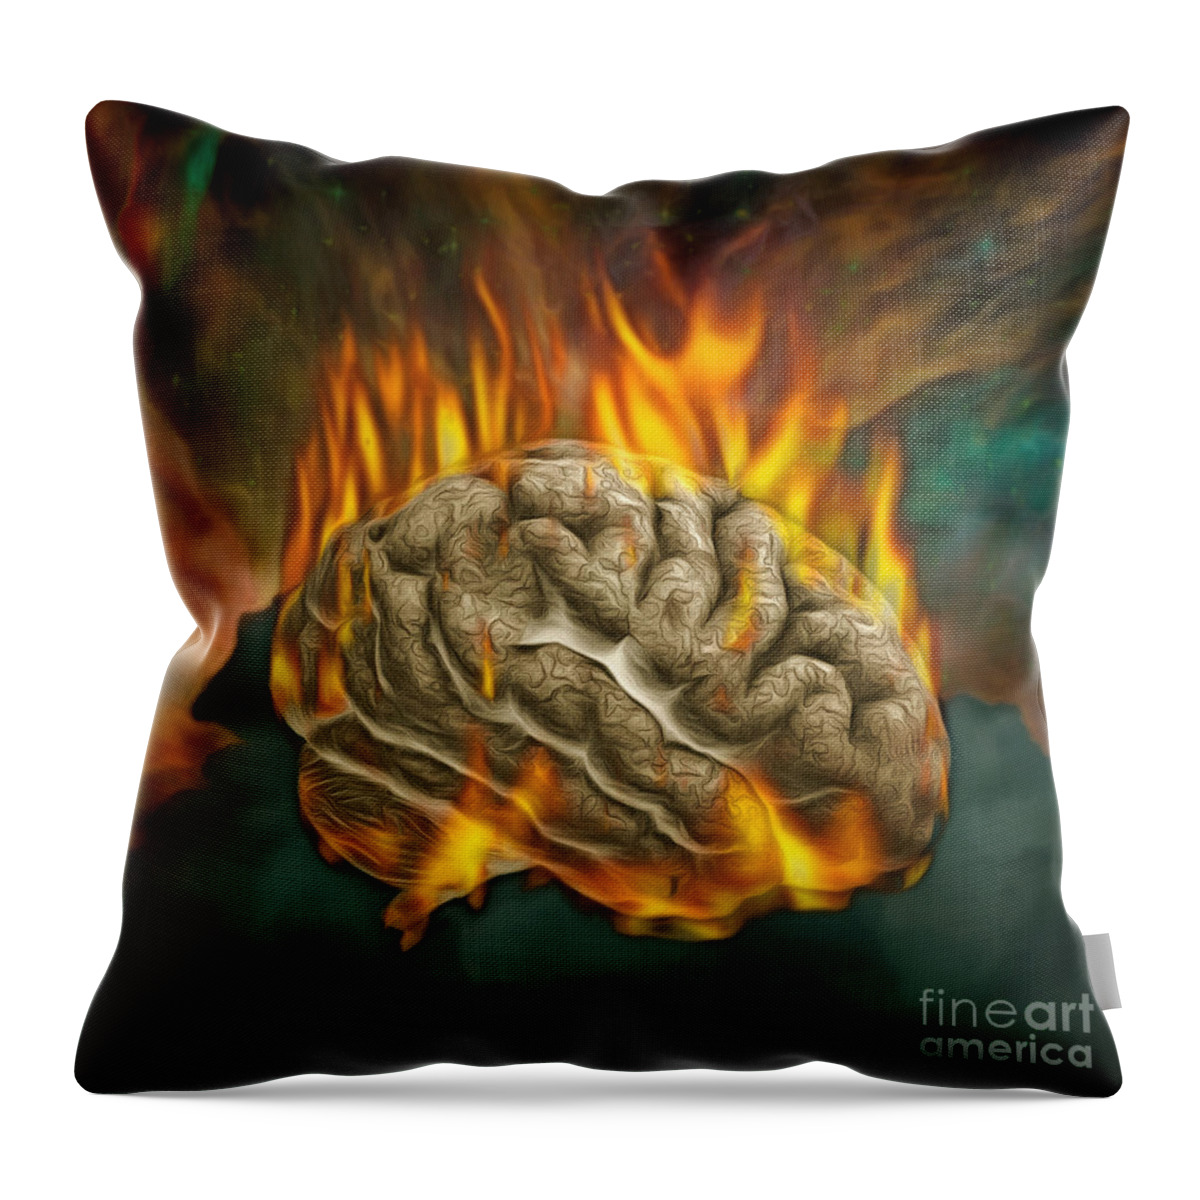 Burning Throw Pillow featuring the digital art Burning mind #3 by Bruce Rolff